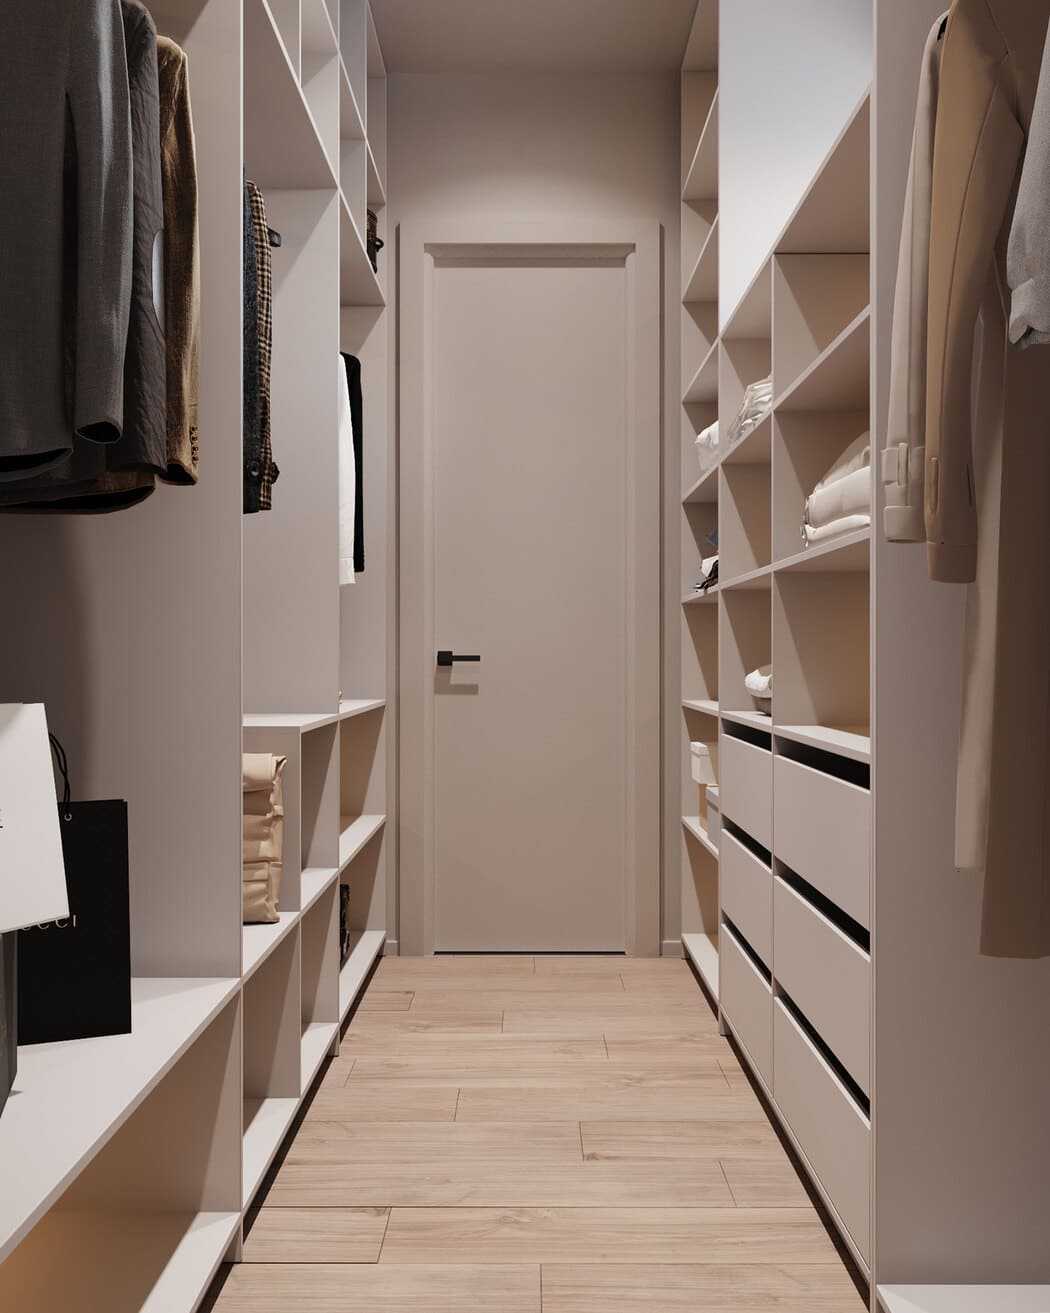 Aesthetic apartment for a young family, wardrobe, photo 7